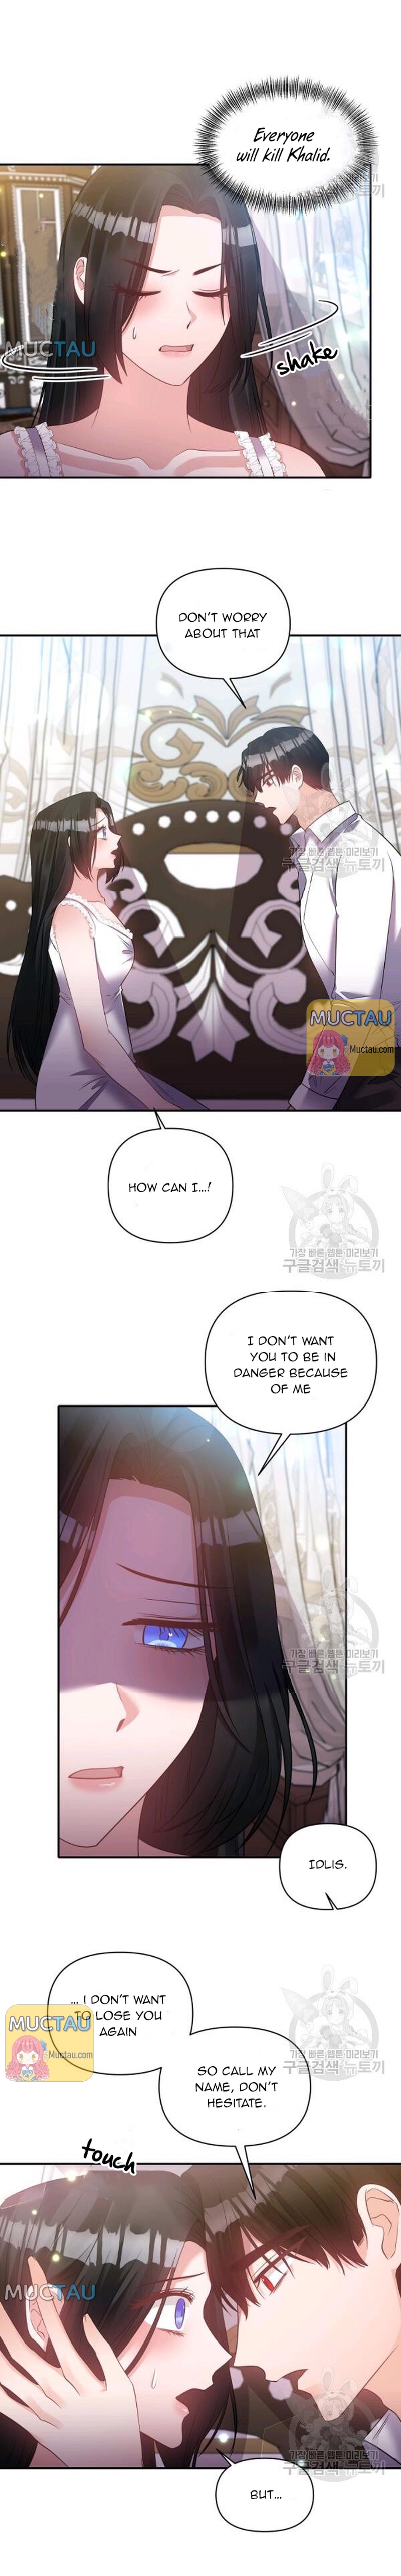 The Tyrant Husband Has Changed - Page 2